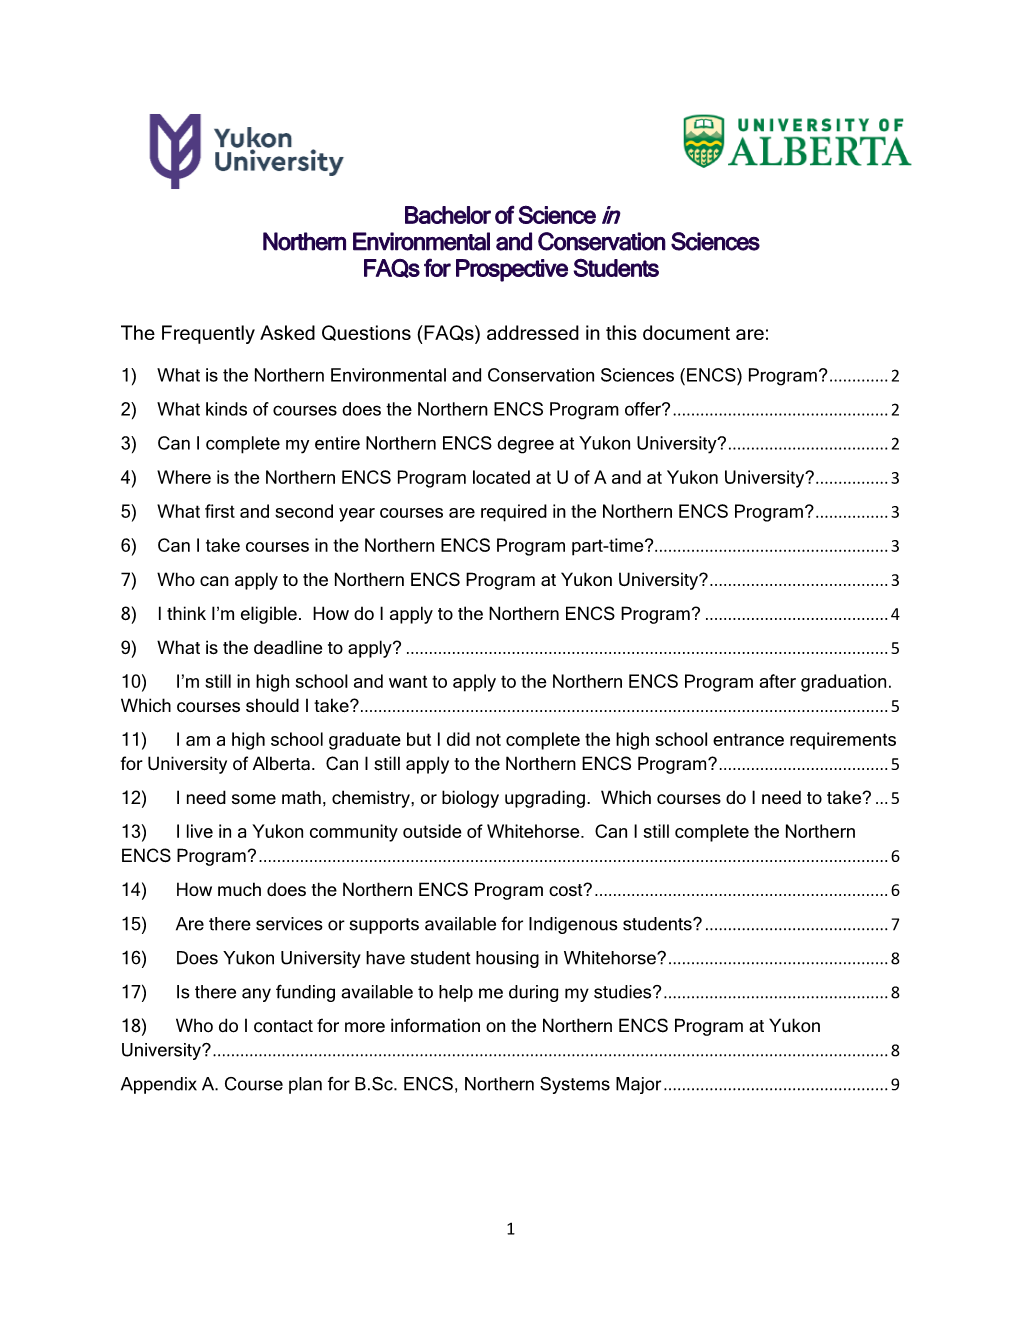 Bachelor of Science in Northern Environmental and Conservation Sciences Faqs for Prospective Students